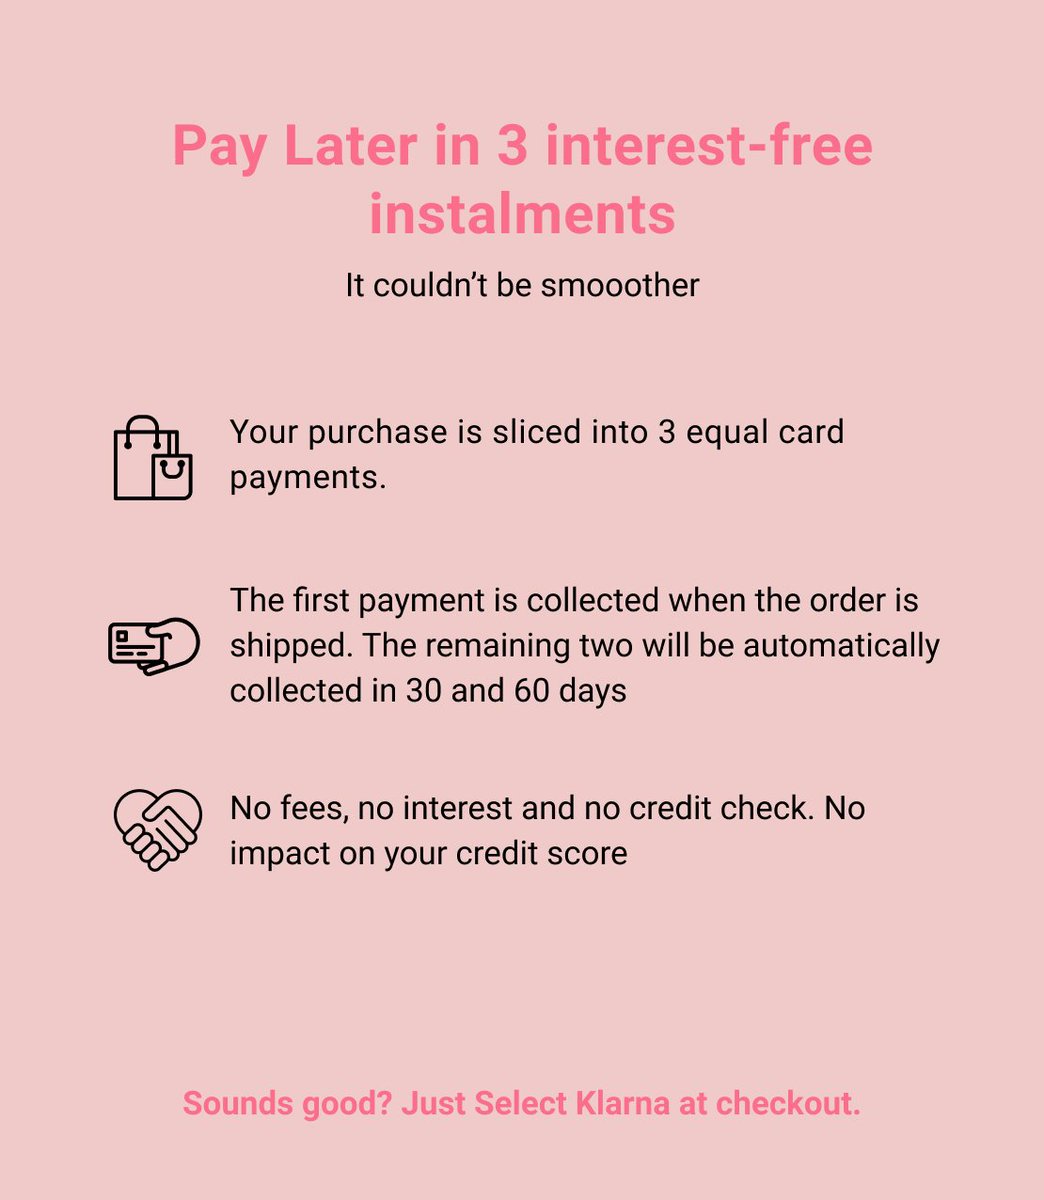 Manipulative advertising - Claims in ads of ’no impact on your credit score’, and ‘no interest, no fees, ever'. Also not true on all products, and misleading. 6/12Please sign the petition  https://bit.ly/3dlSY2r 